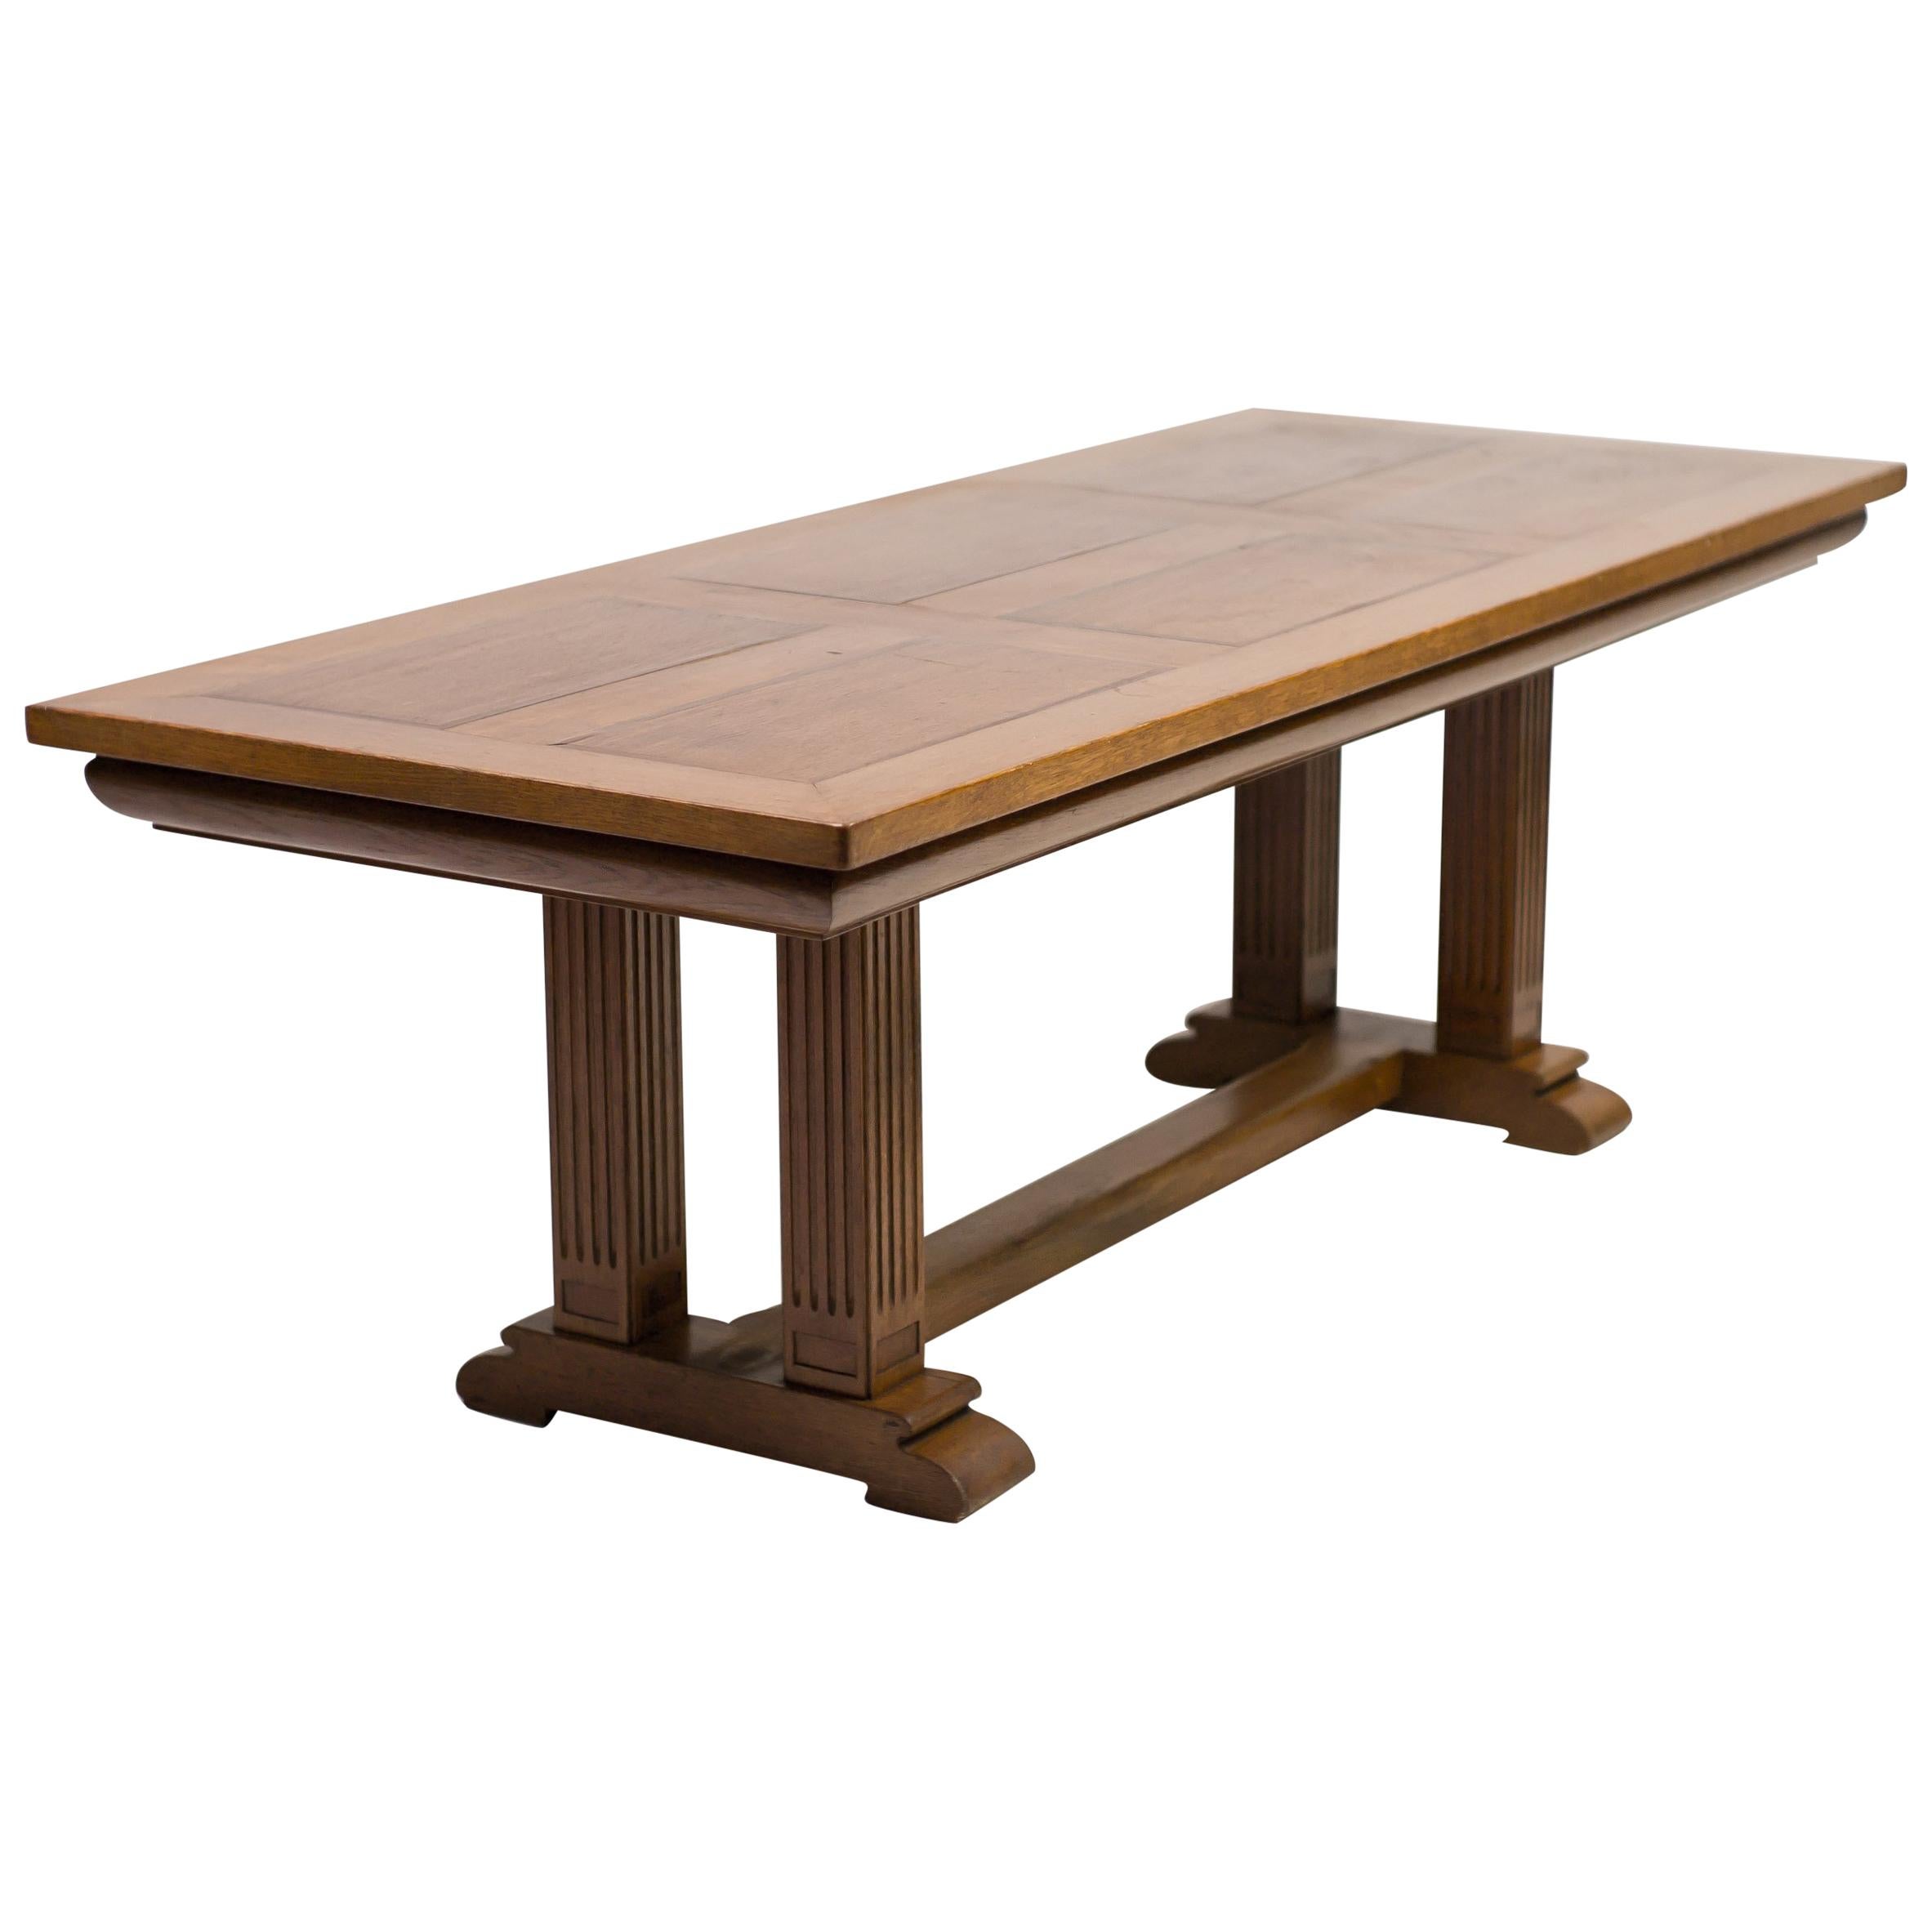 Architectural Oak Dining Table